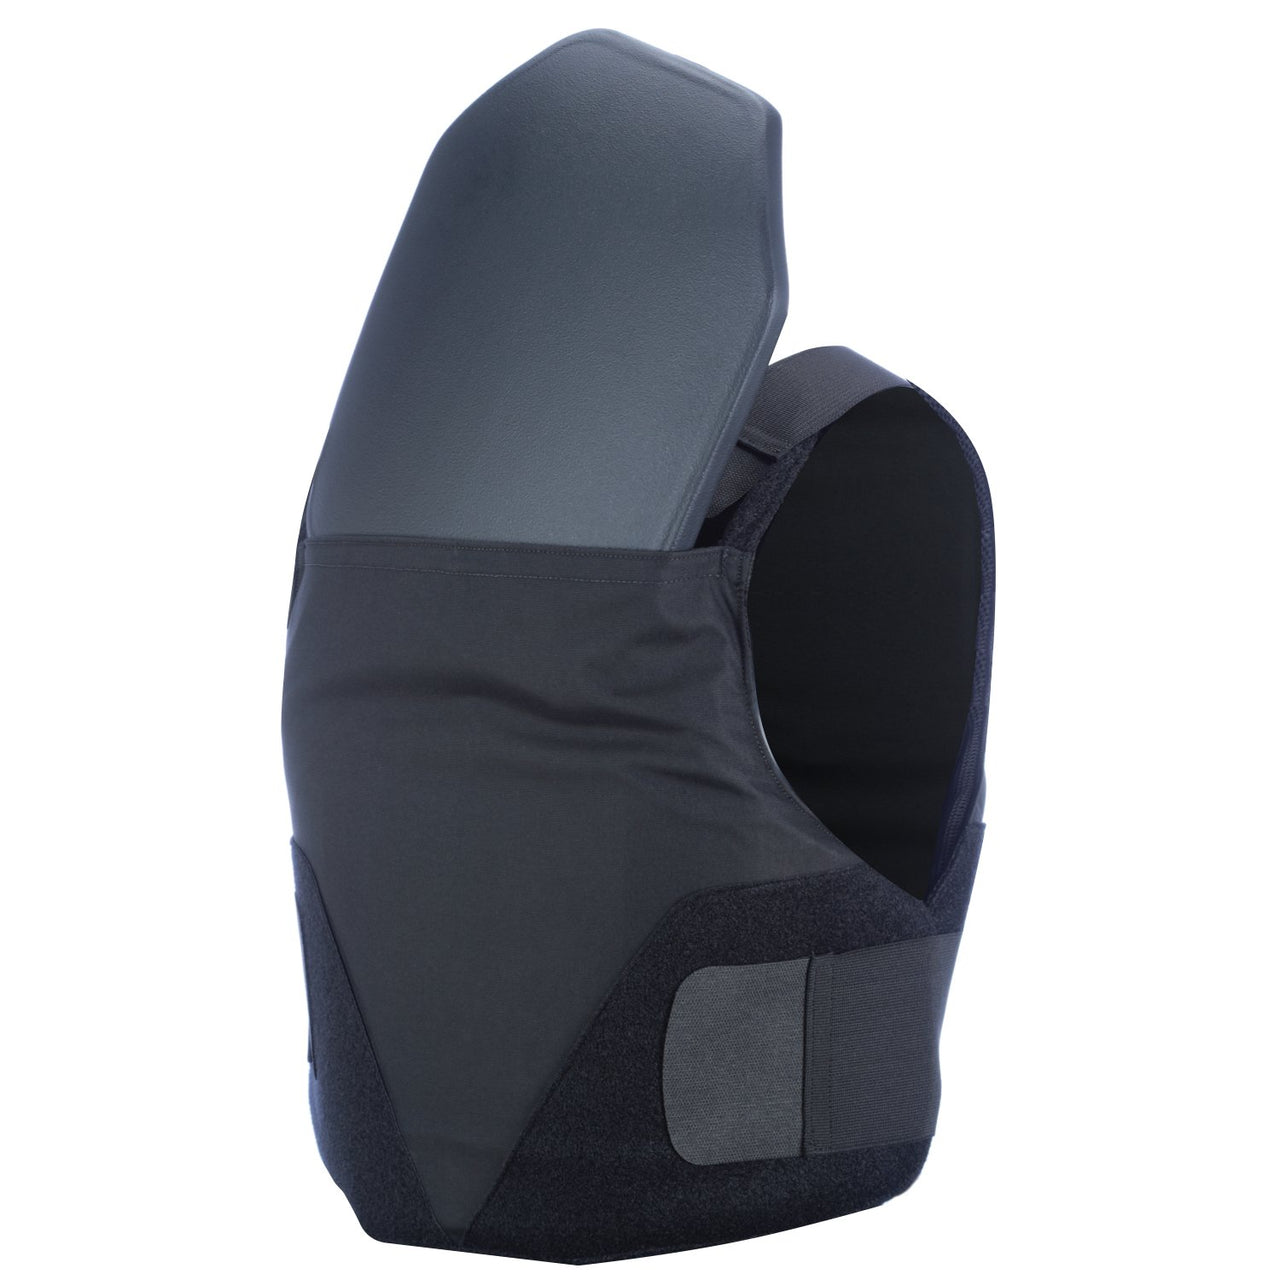 An image of a Body Armor Direct All American Concealable Enhanced Multi-Threat Vest with an open back.